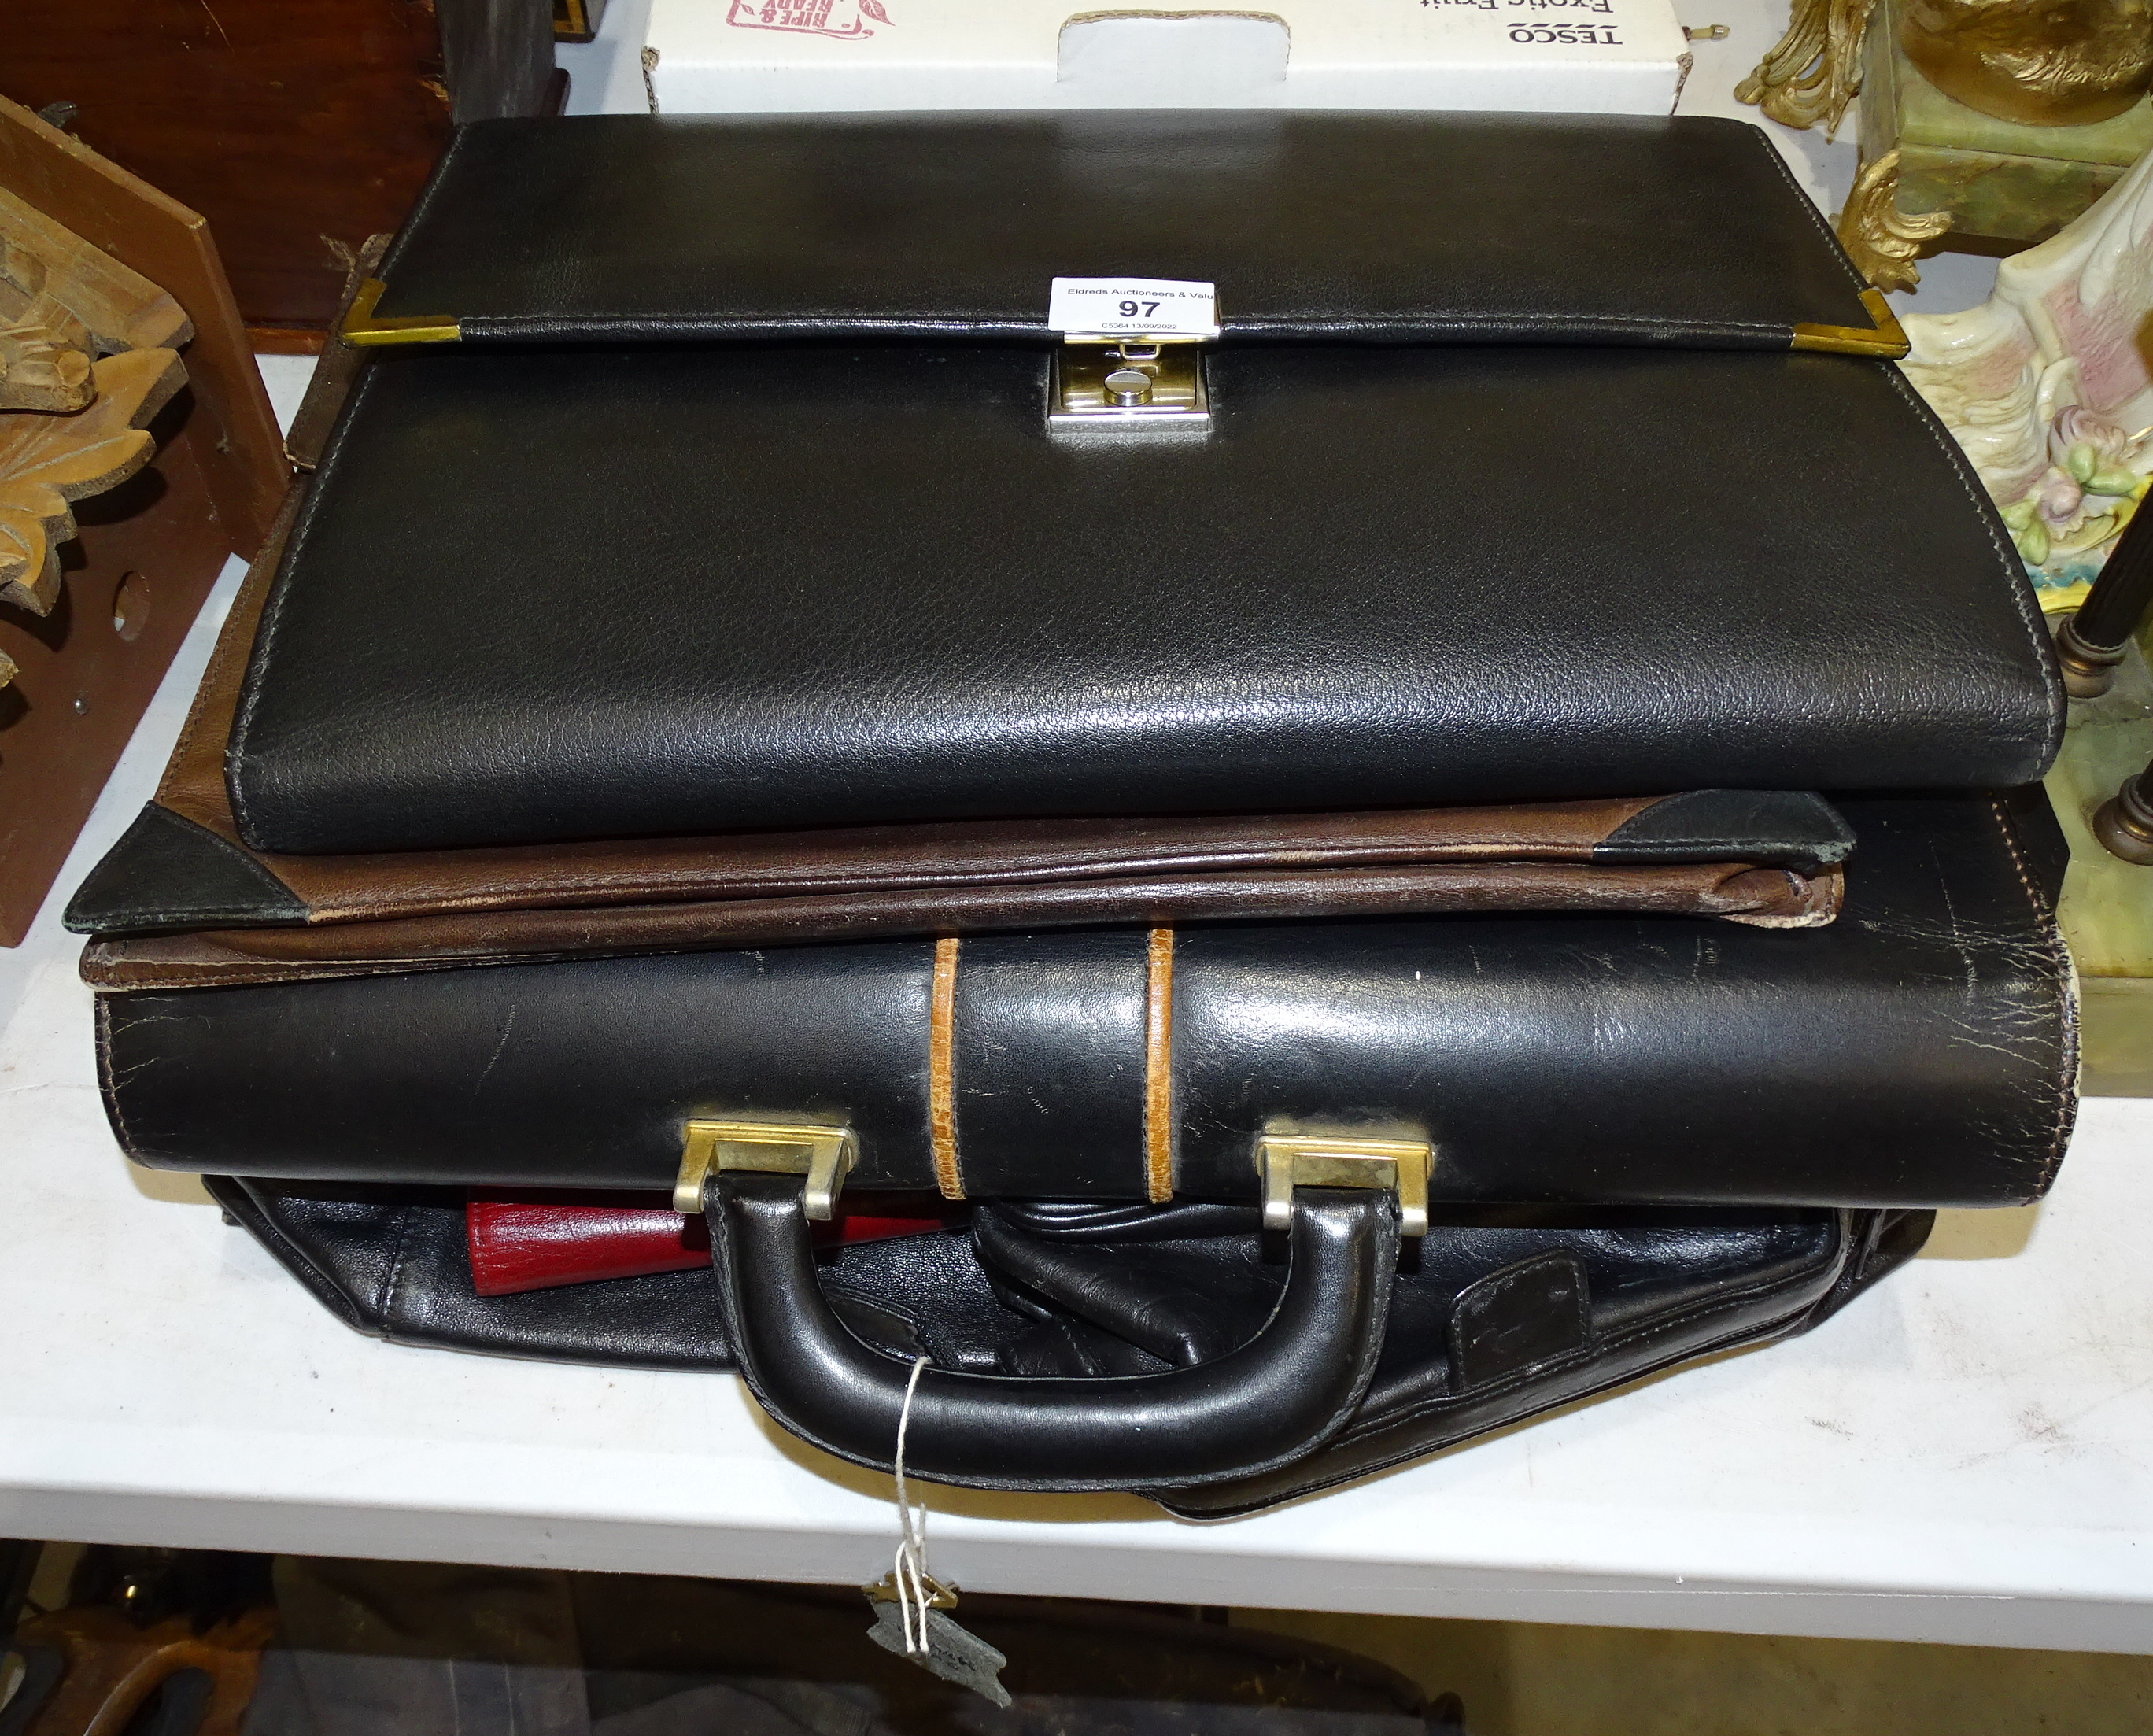 A collection of leather document cases, wallets and other items.